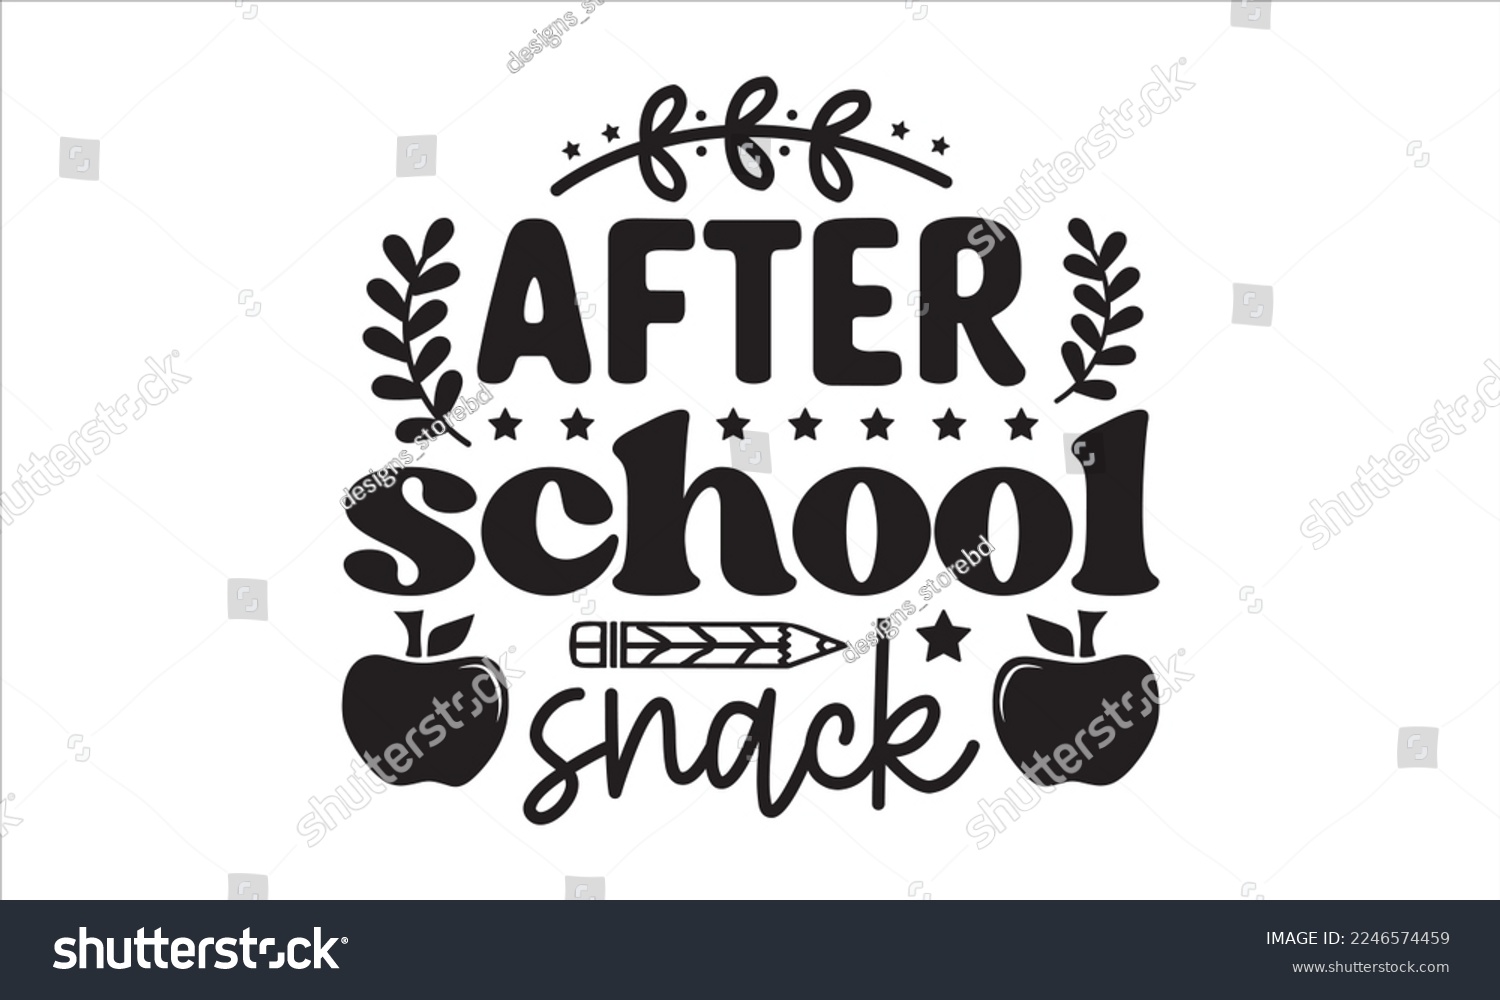 SVG of After school snack Svg, Teacher SVG, Teacher SVG t-shirt design, Hand drawn lettering phrases, templet, Calligraphy graphic design, SVG Files for Cutting Cricut and Silhouette svg